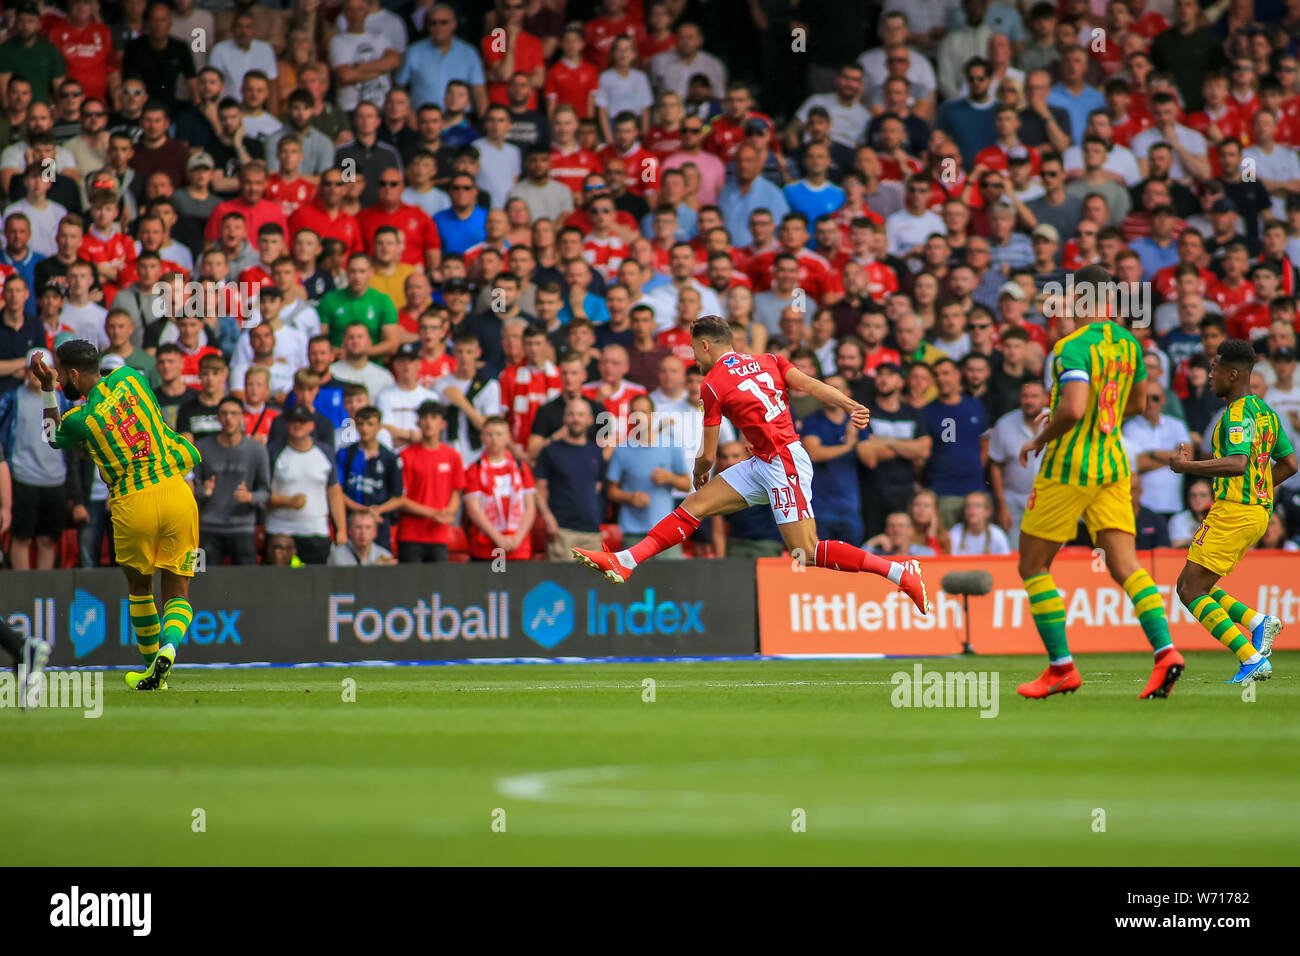 3rd August 2019, City Ground, Nottingham, England ; Sky Bet Championship, Nottingham Forest vs West Bromwich Albion :  Matty Cash (11) of Nottingham Forest  scores to make it 1-0  Credit: Craig Milner/News Images  English Football League images are subject to DataCo Licence Stock Photo